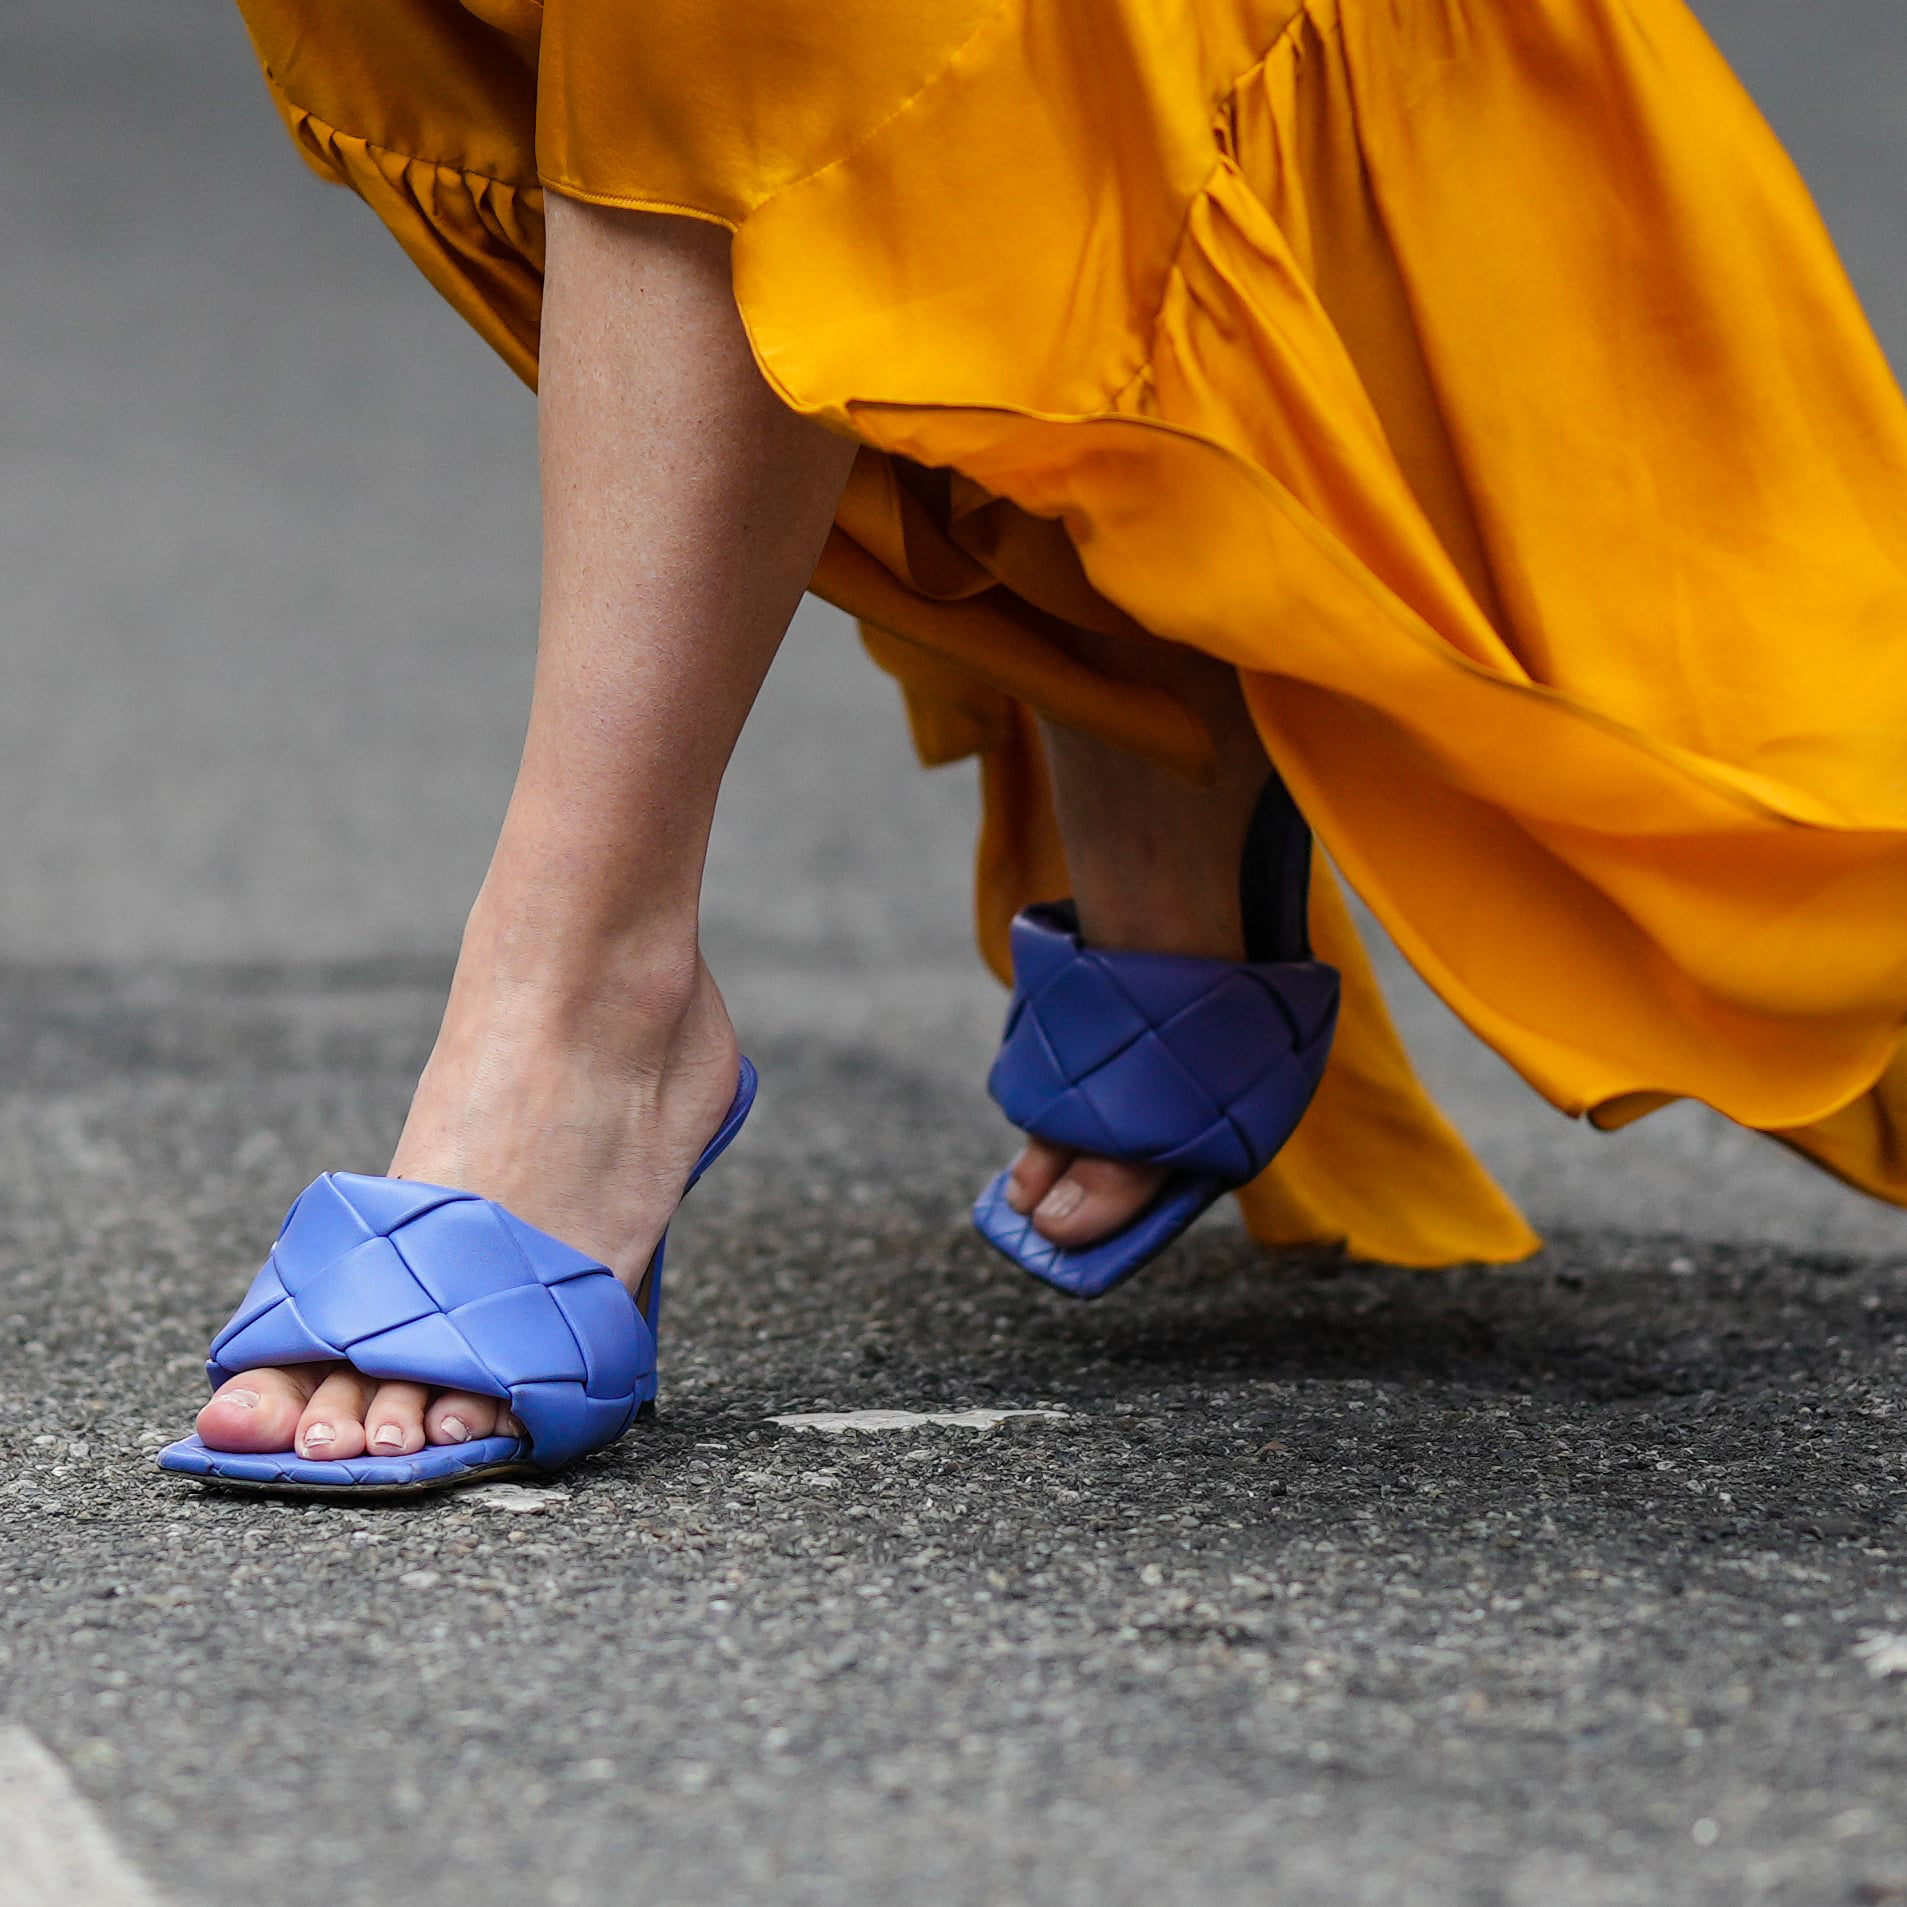 The 13 Most Comfortable Heels For Work, Weddings, and More